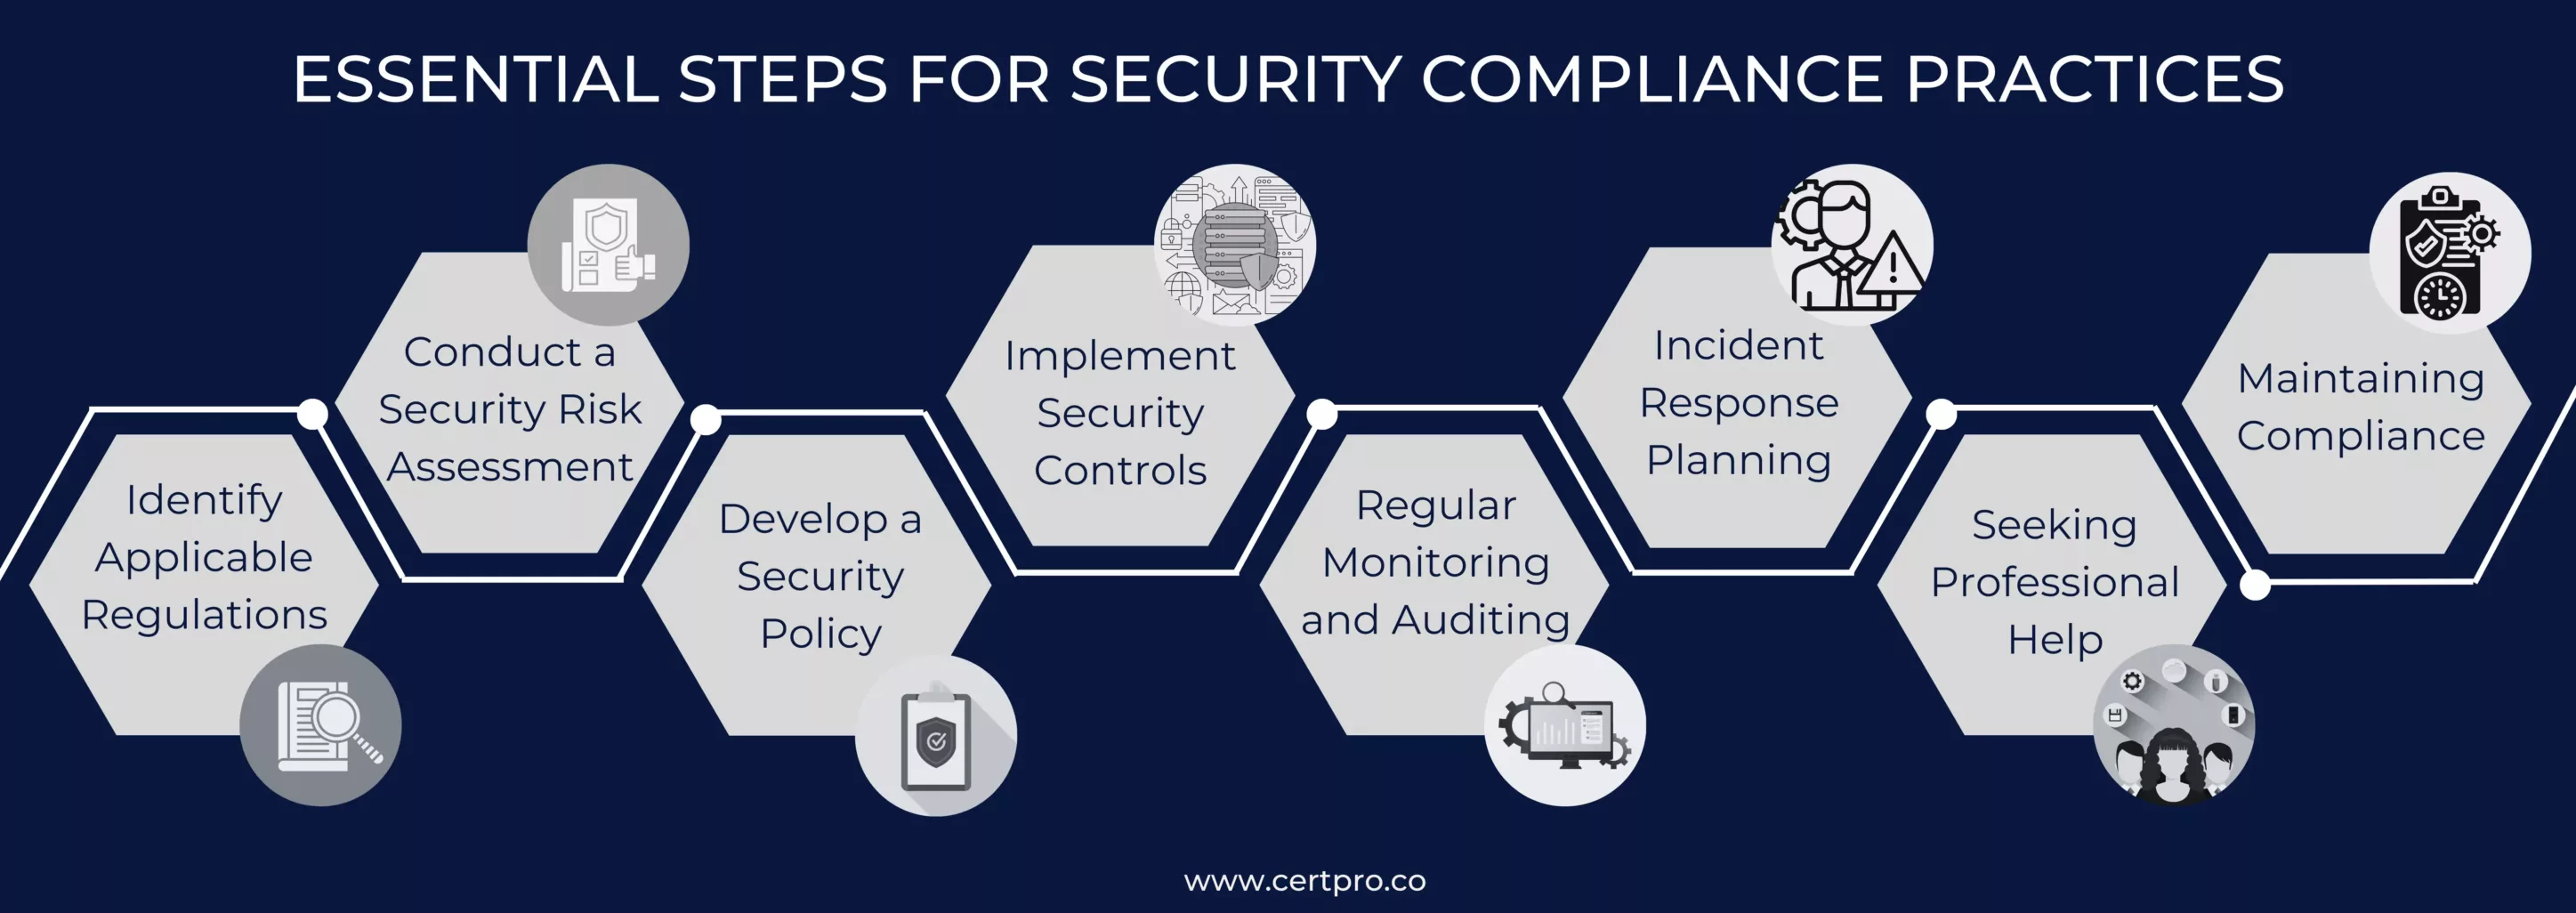 ESSENTIAL STEPS FOR SECURITY COMPLIANCE PRACTICES